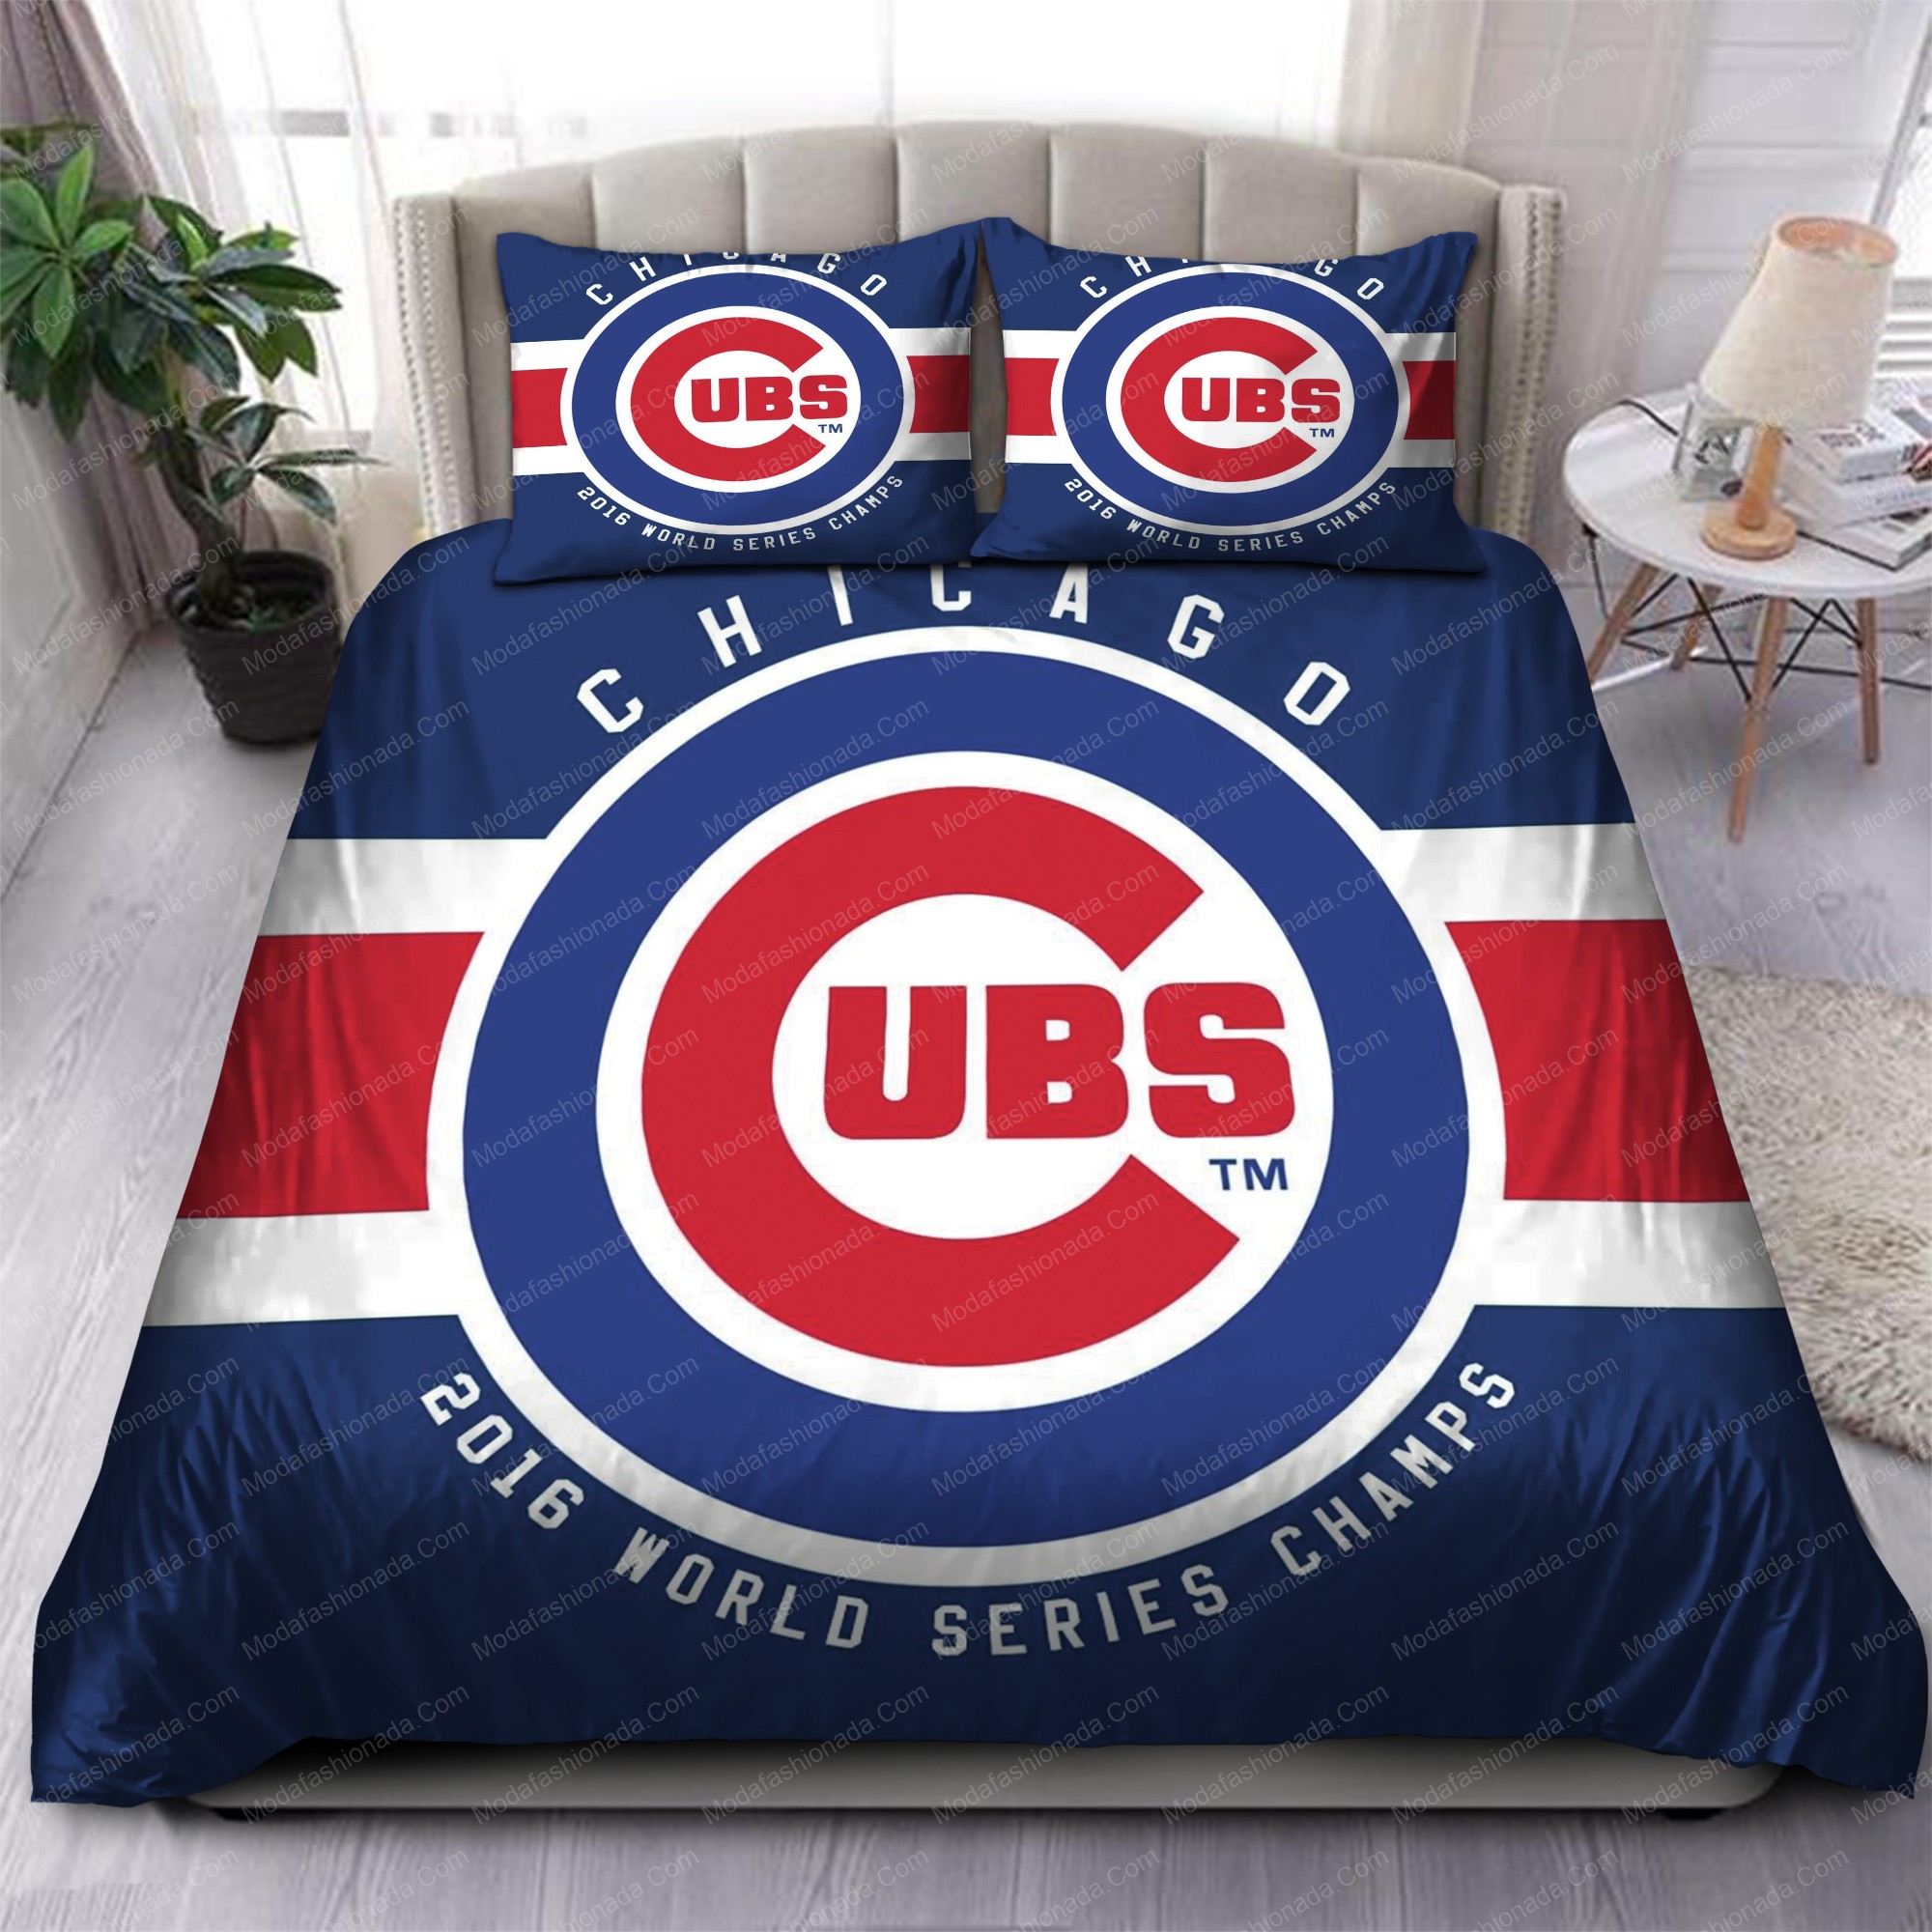 2016 Worrld Series Champions Chicago Cubs Mlb 63 Logo Type 1410 Bedding Sets Sporty Bedroom Home Decor